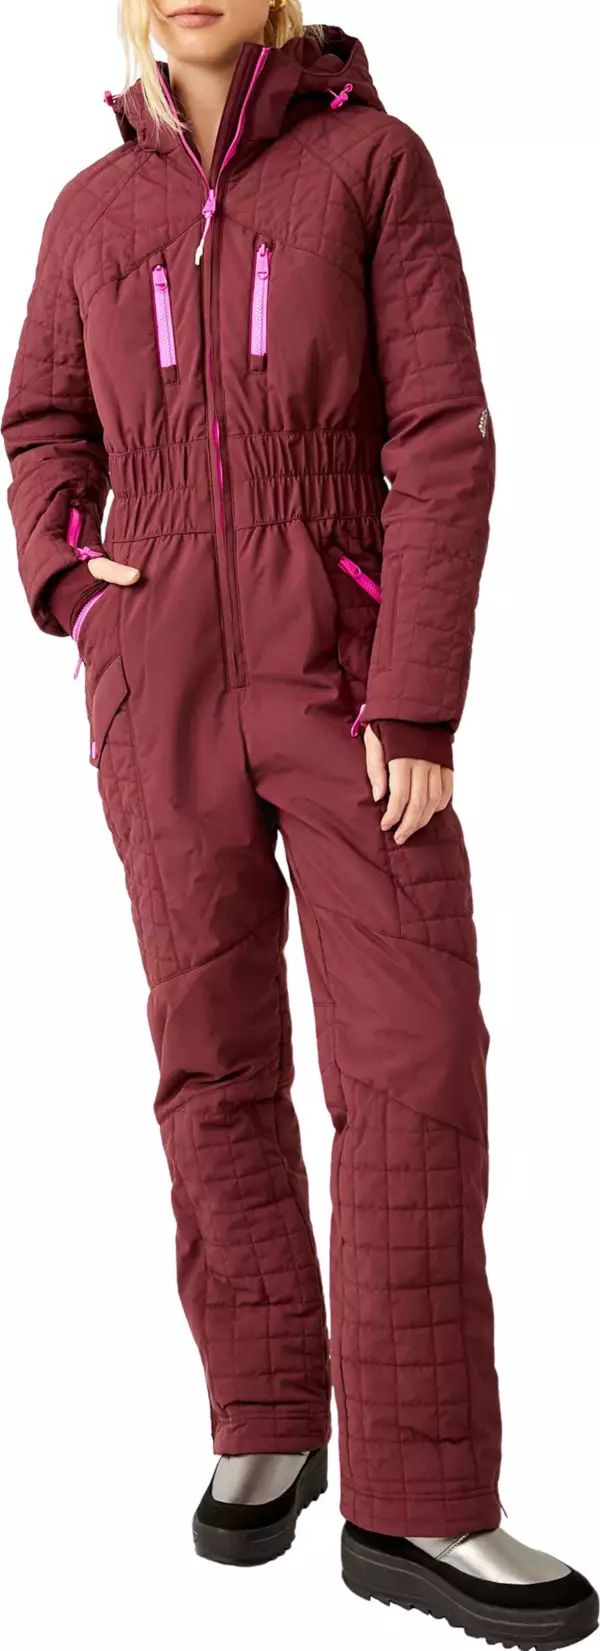 FP Movement Women's All Prepped Ski Suit | Dick's Sporting Goods | Dick's Sporting Goods